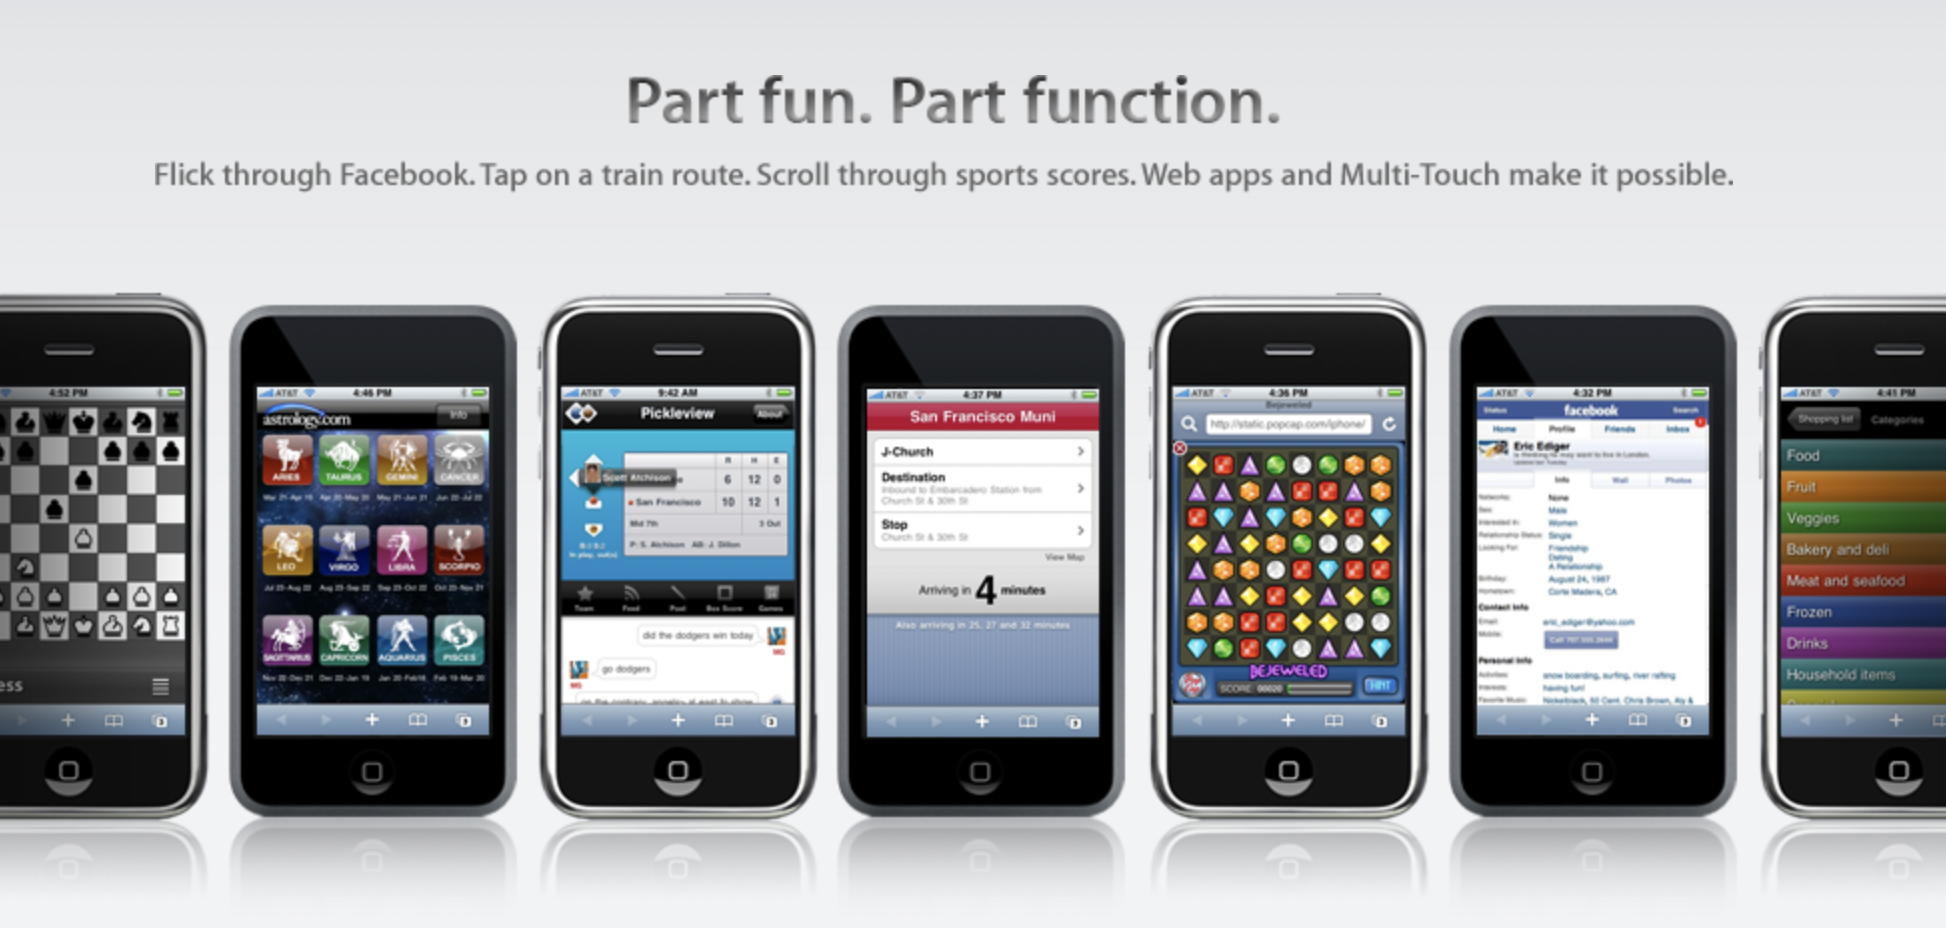 Web apps on iPhone and iPod touch.